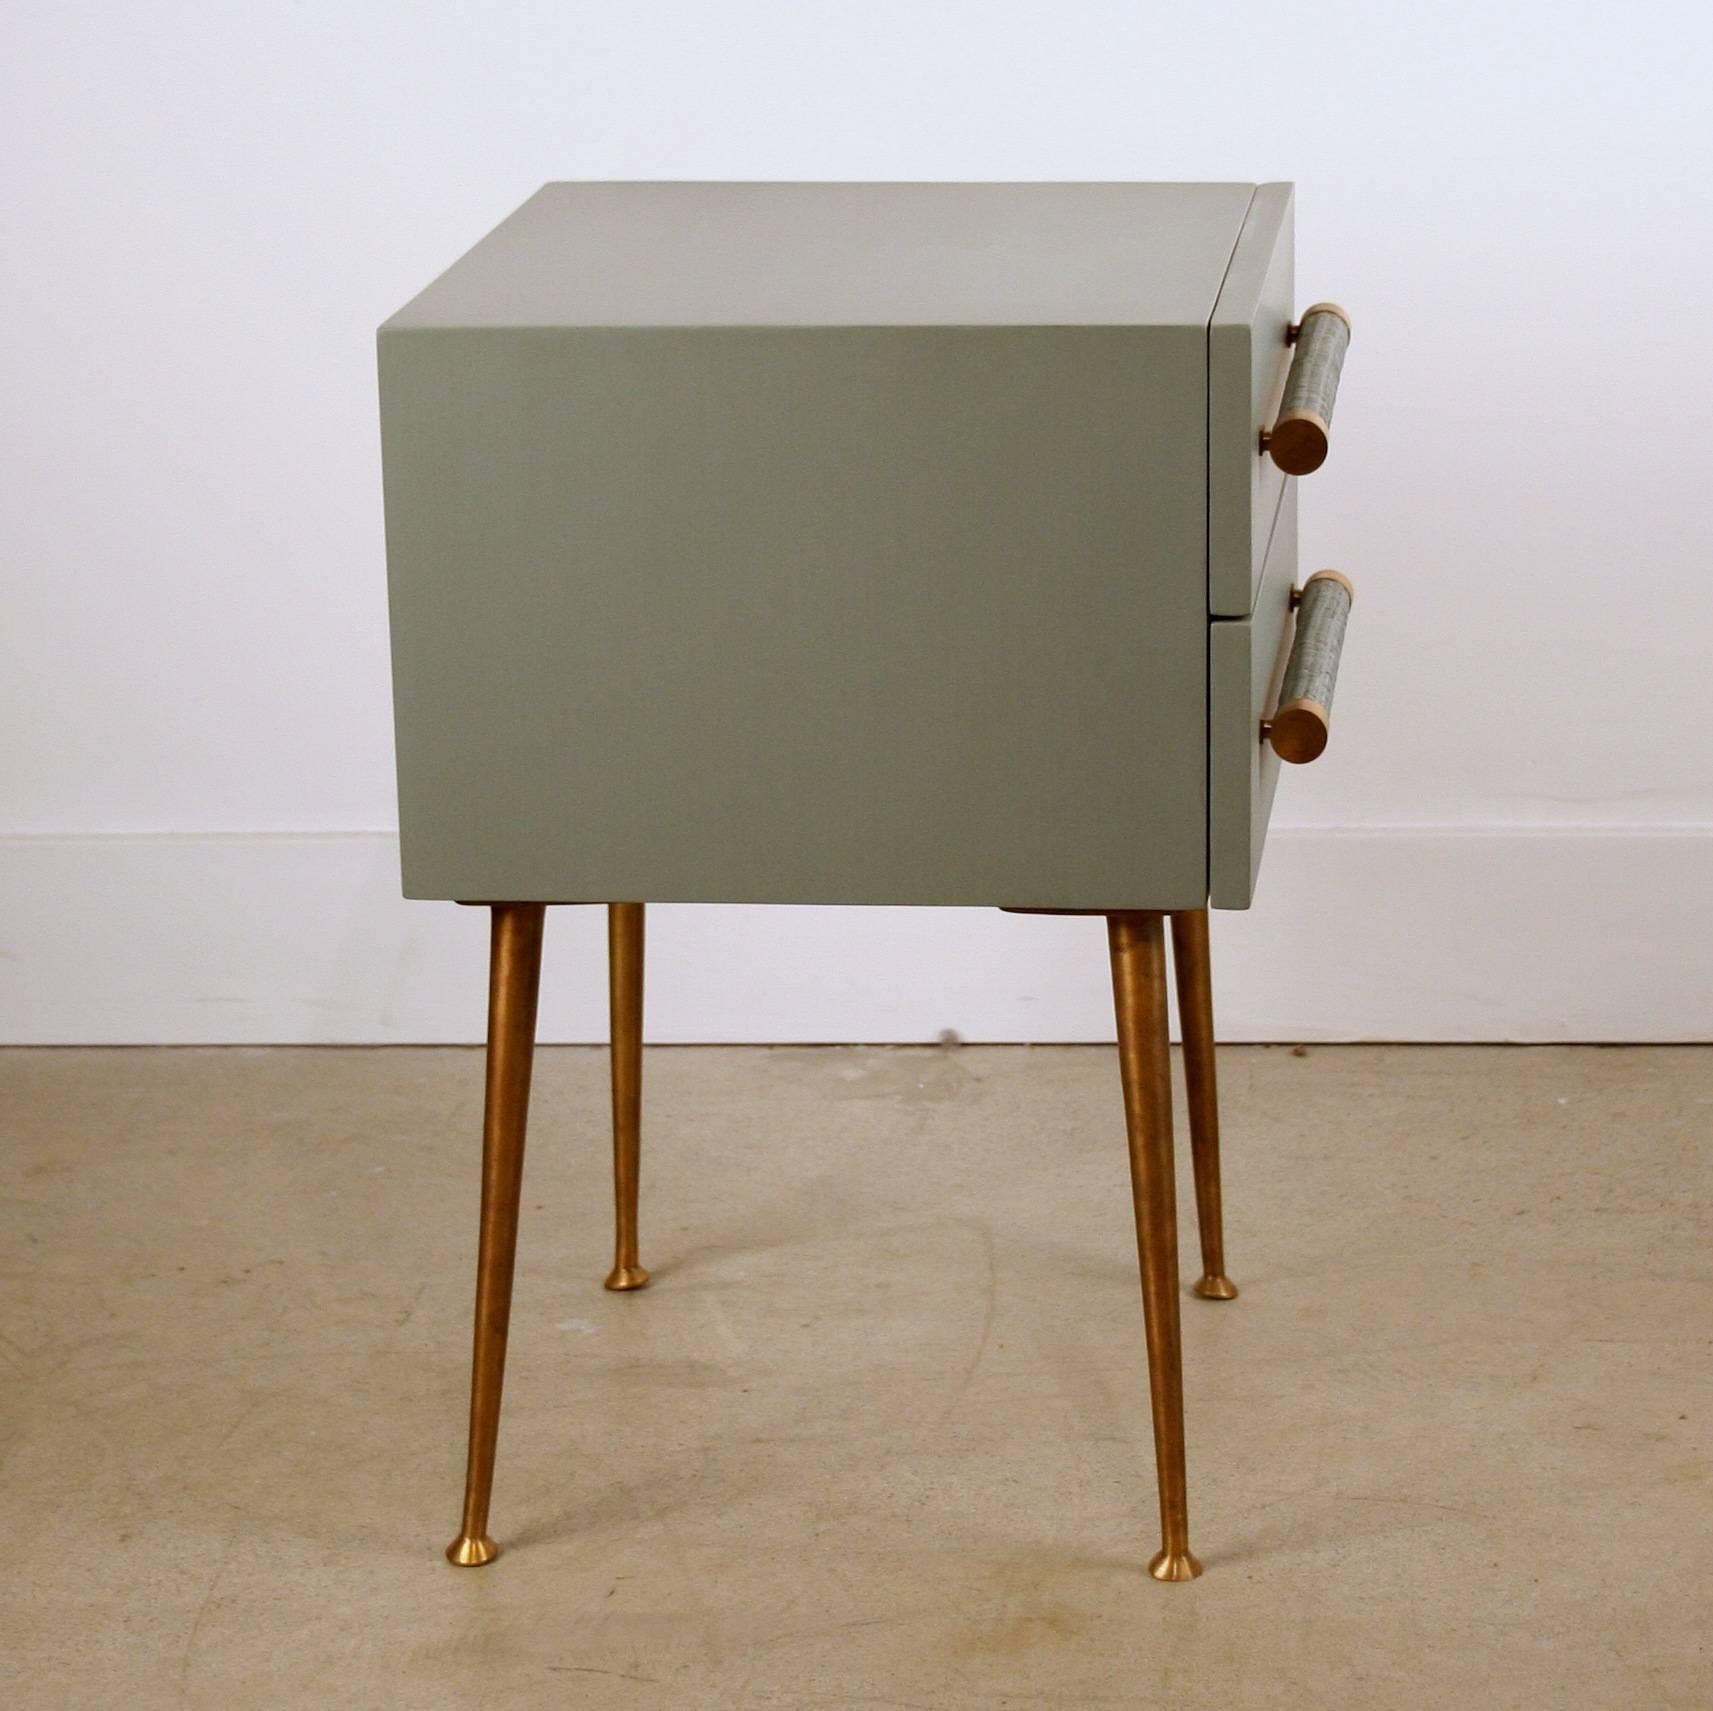 American Two-Drawer Bedside Table with Brass Legs and Wicker and Brass Handles